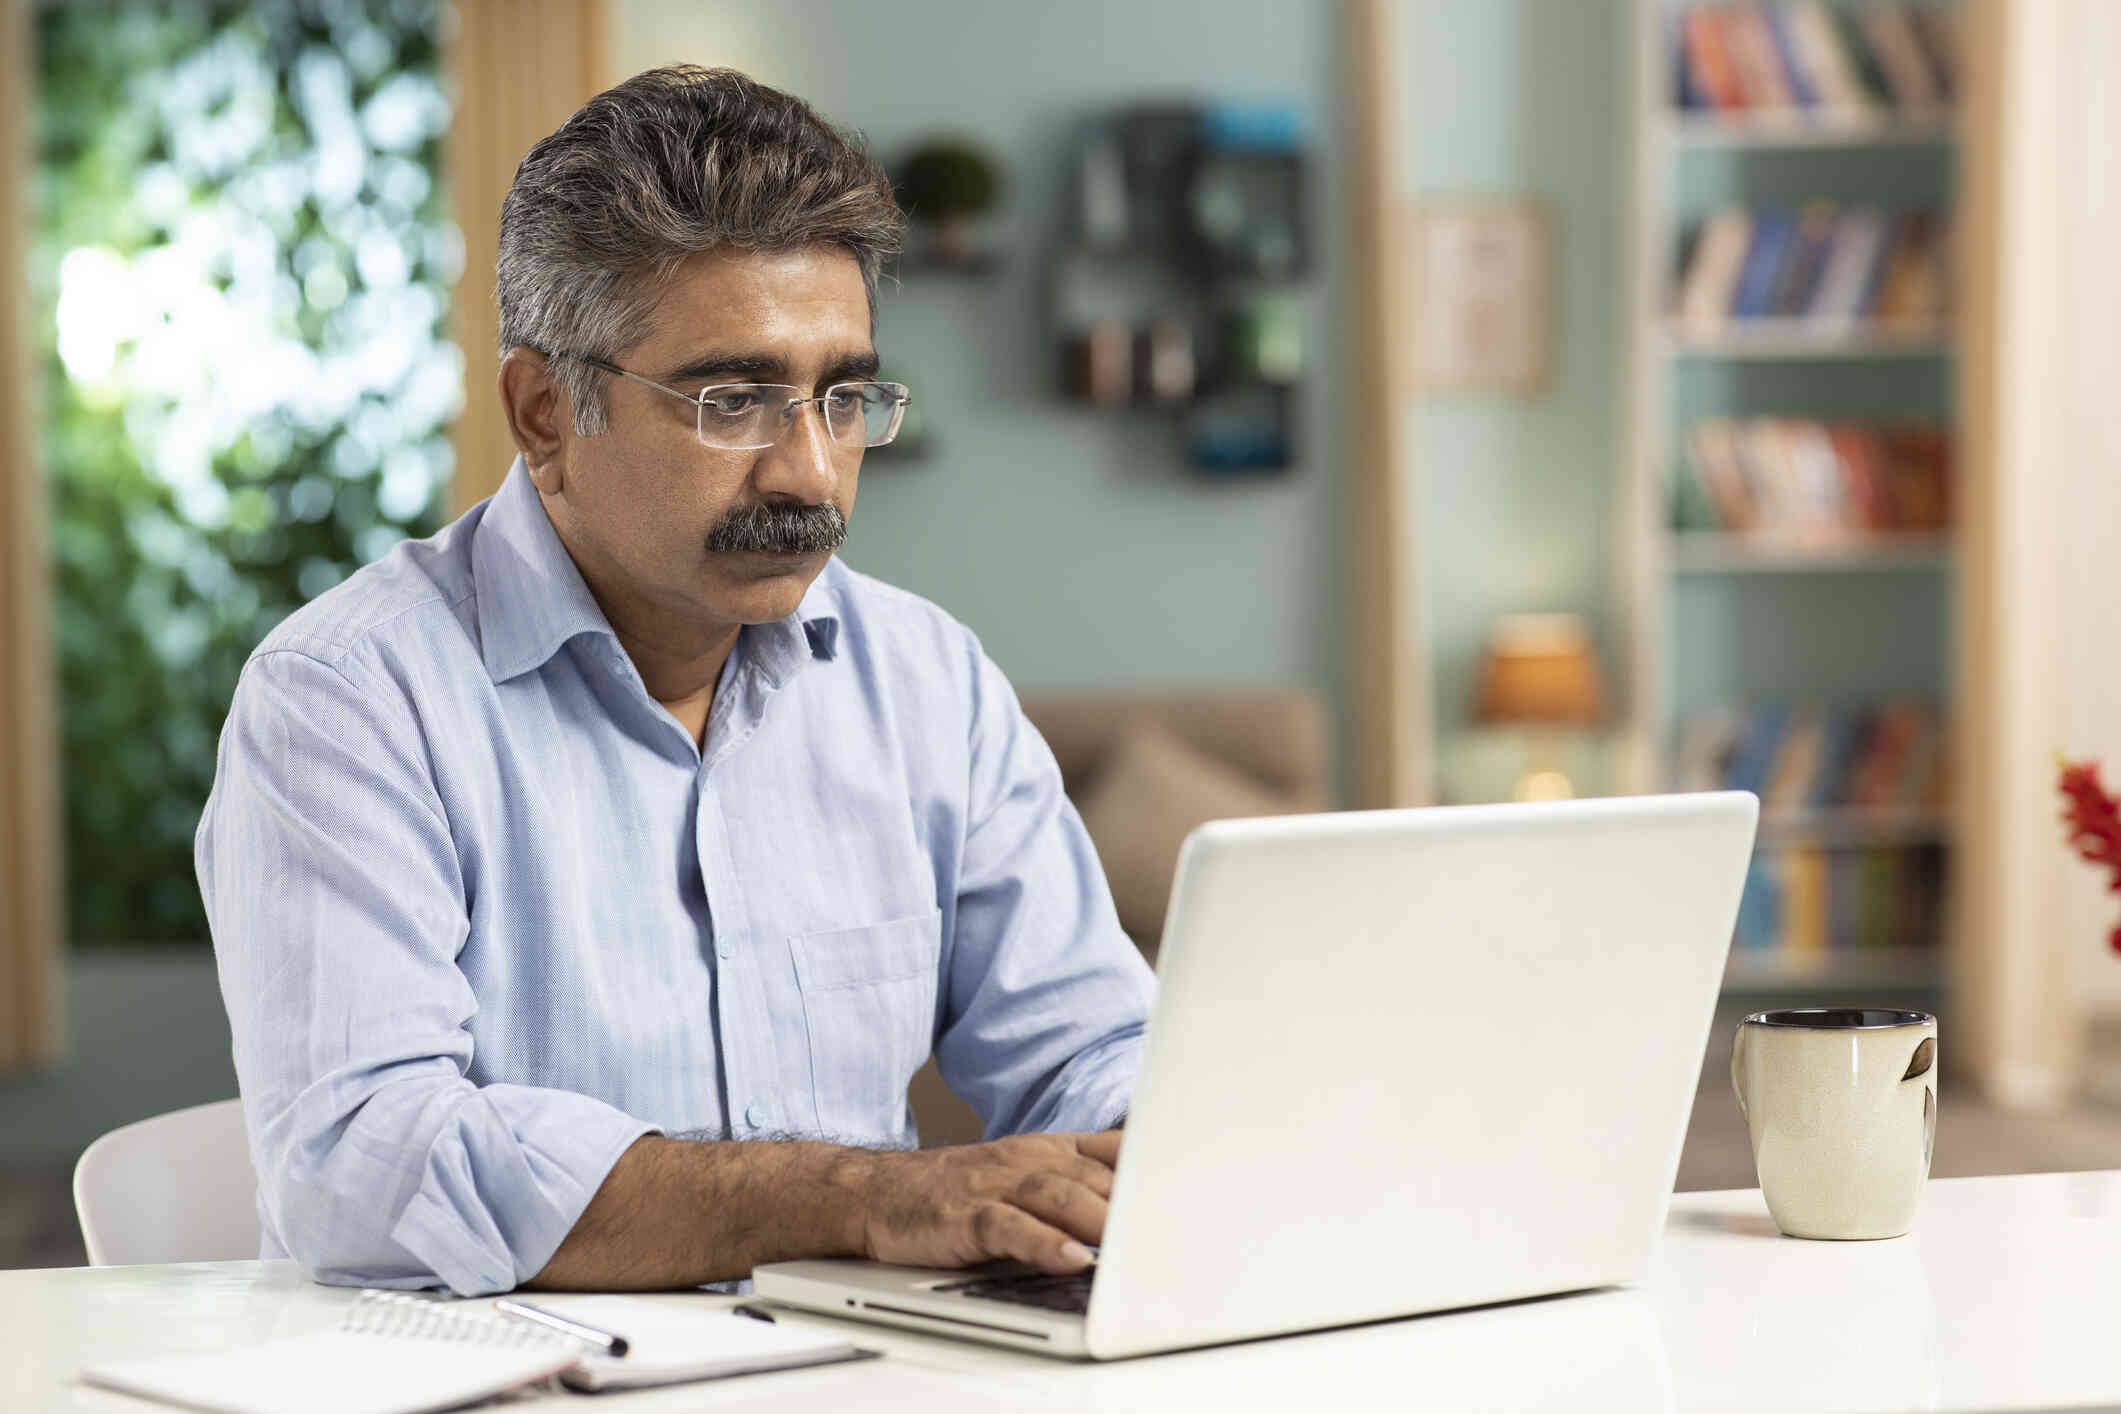 A middle aged man with glasses sits at a wooden table and types on the laptop open infront of him.